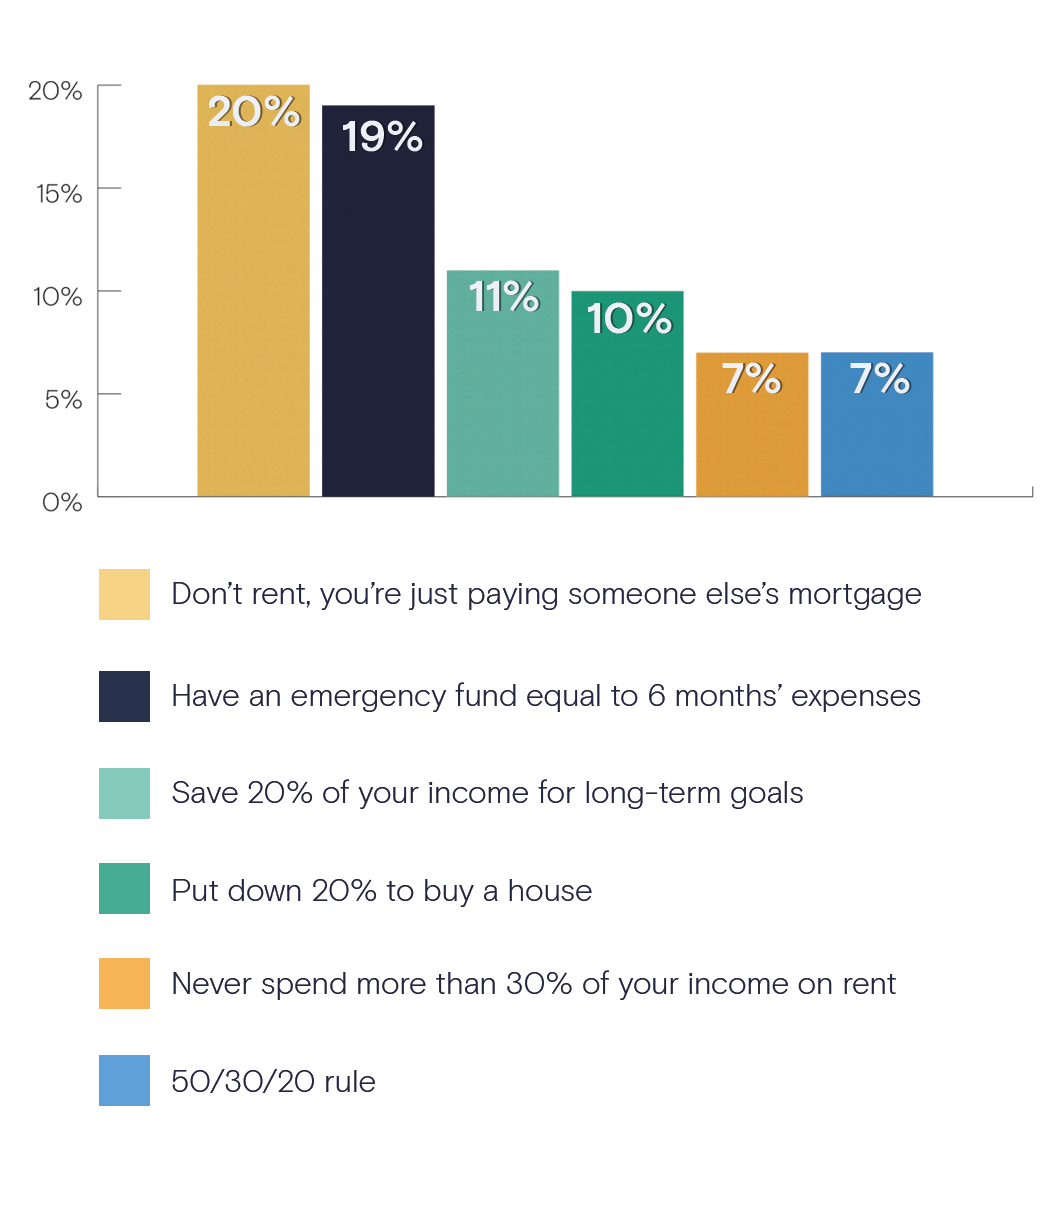 Image shows a bar chart which represents what percentage of respondents follows each of the six rules. From left to right the bars show; 20% follow 'don’t rent, you're just paying someone else's mortgage', 19% follow 'have an emergency fund equal to 6 months' expenses', 11% follow 'save 20% of your income for long-term goals', 10% follow 'put down 20% to buy a house', 7% follow 'never spend more than 30% of your income on rent', and 7% follow the 50/30/20 rule.